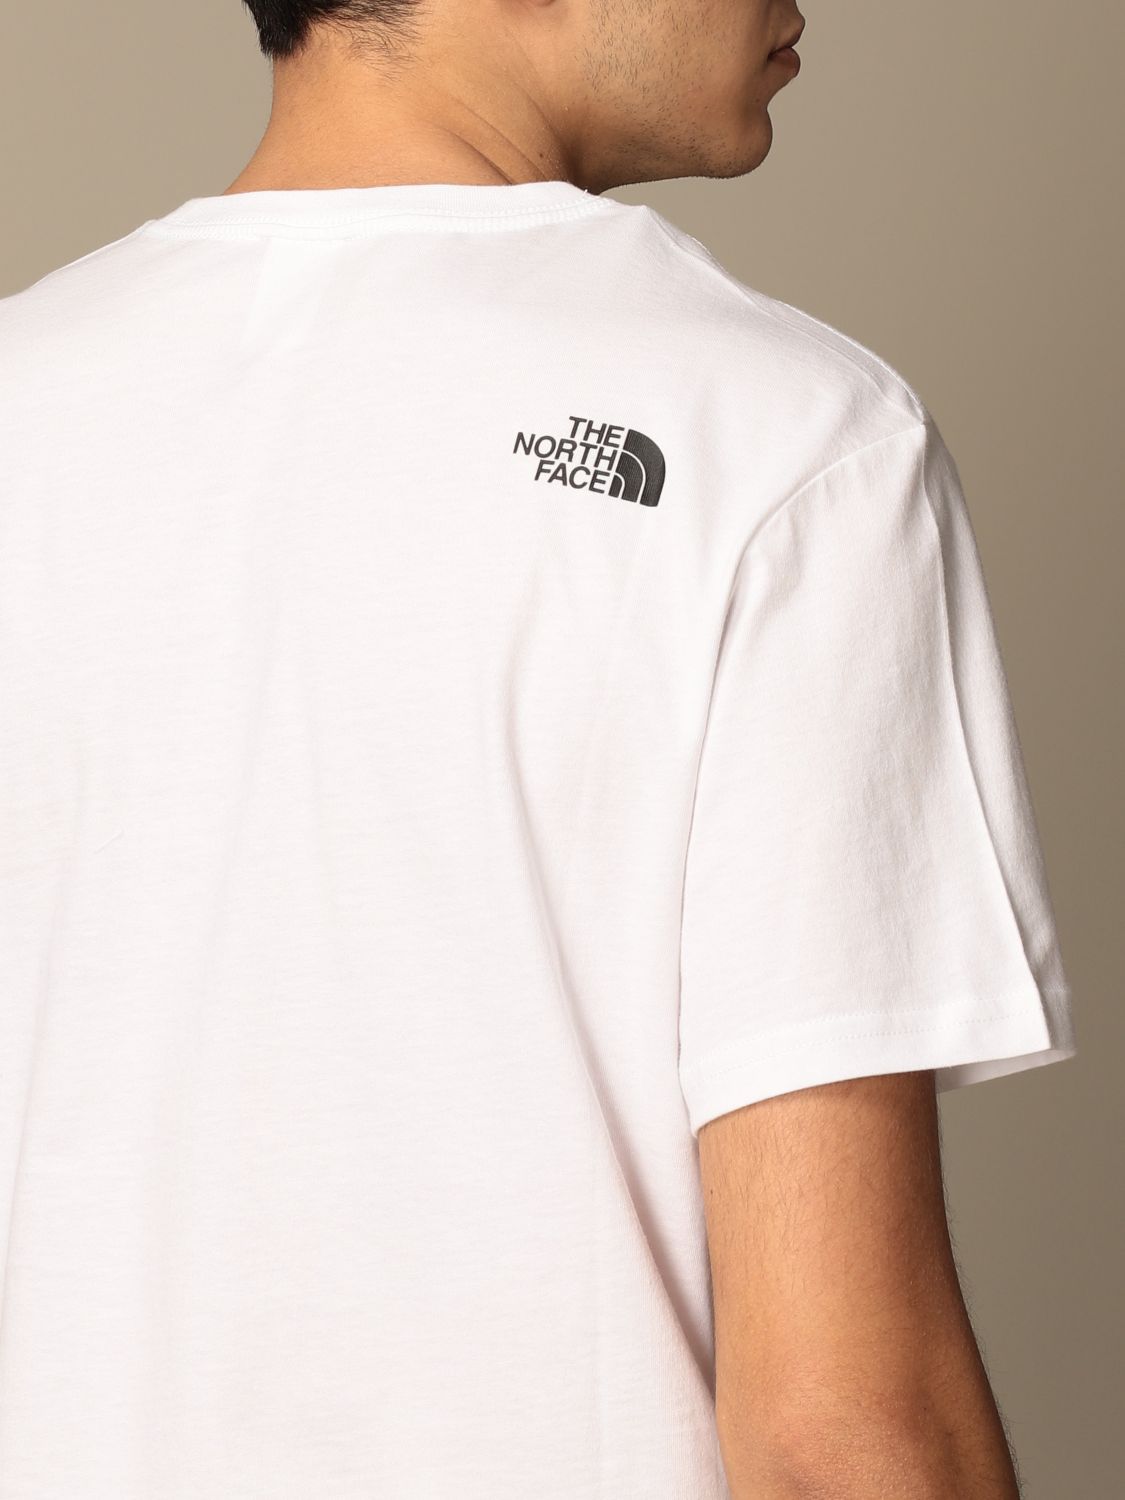 the north face white tee